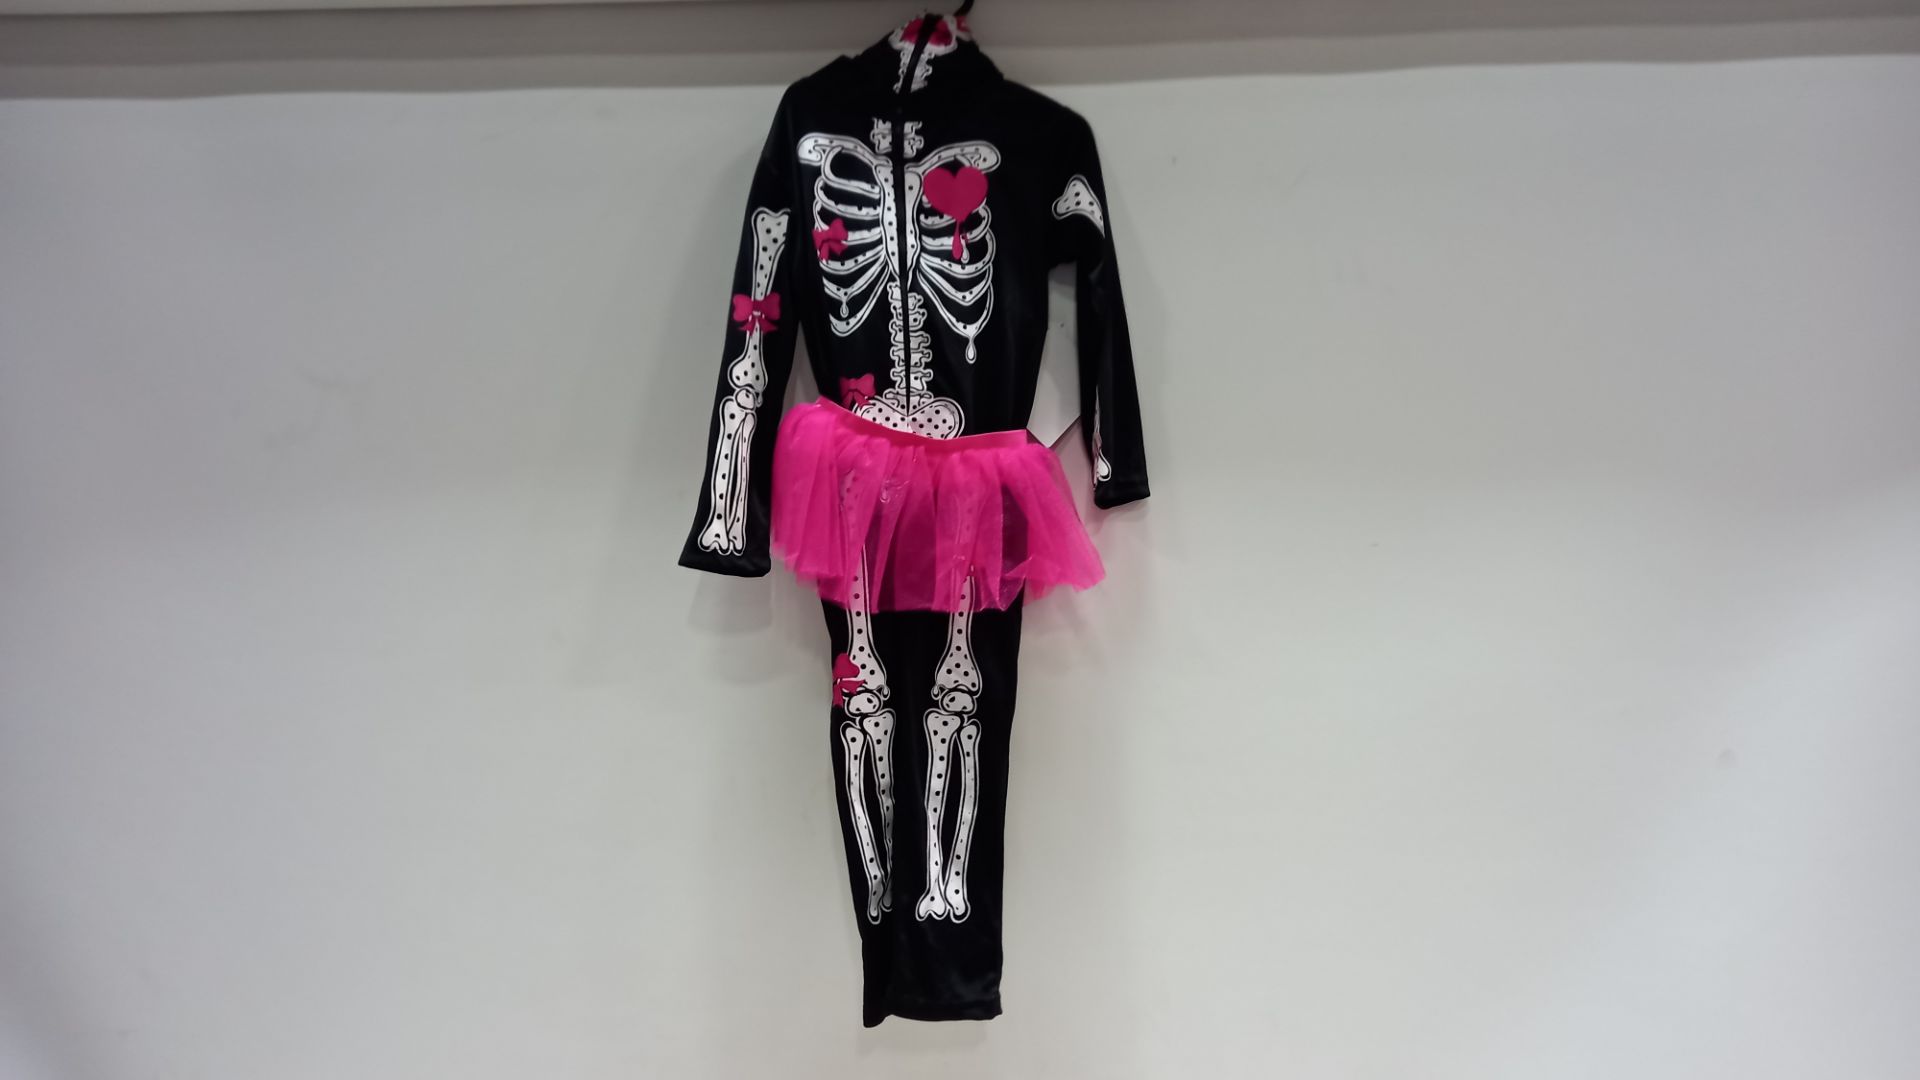 18 X CHILDREN'S SCARY GHOUL DRESSES WITH SKELETON HEAD MASK ASSORTED AGES